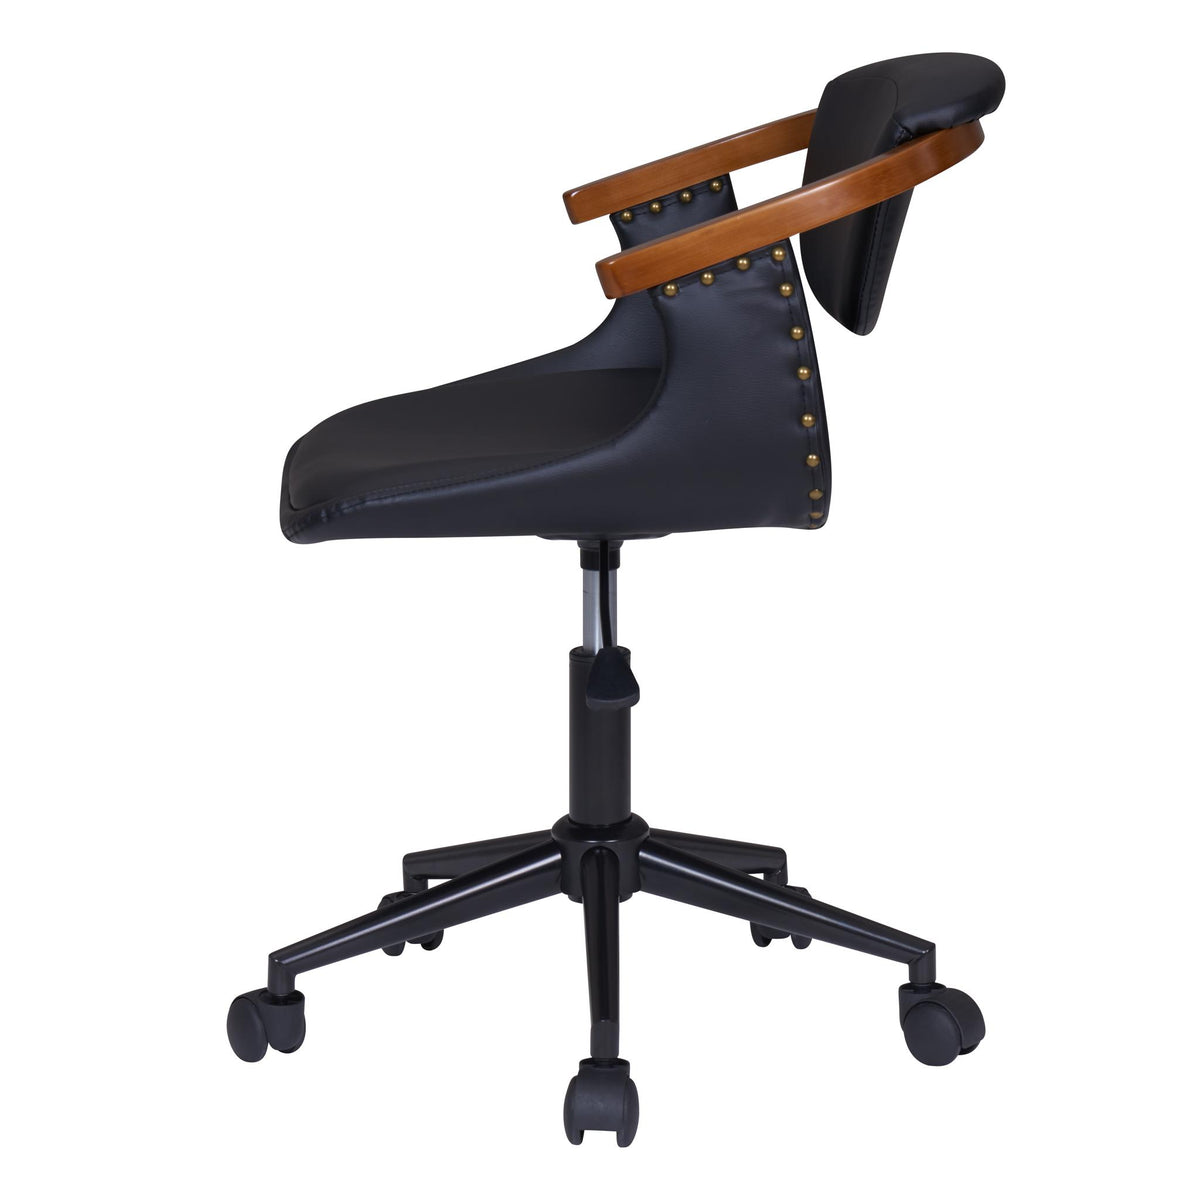 Darwin PU Bamboo Office Chair by New Pacific Direct - 1160015